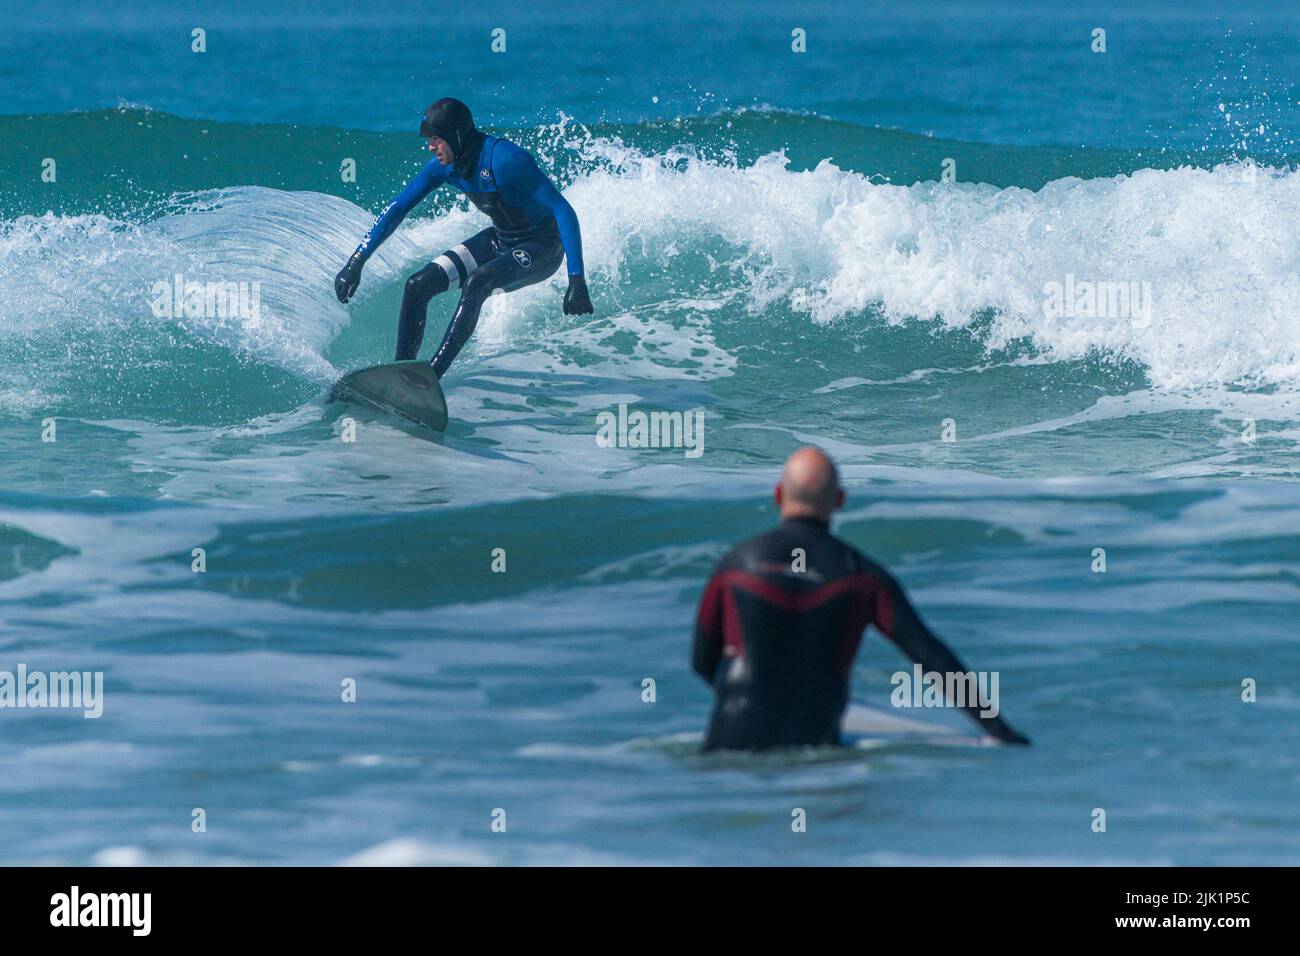 Surfing action as a surfer rides a wave at Fistral in Newquay in Cornwall in the UK. Stock Photo